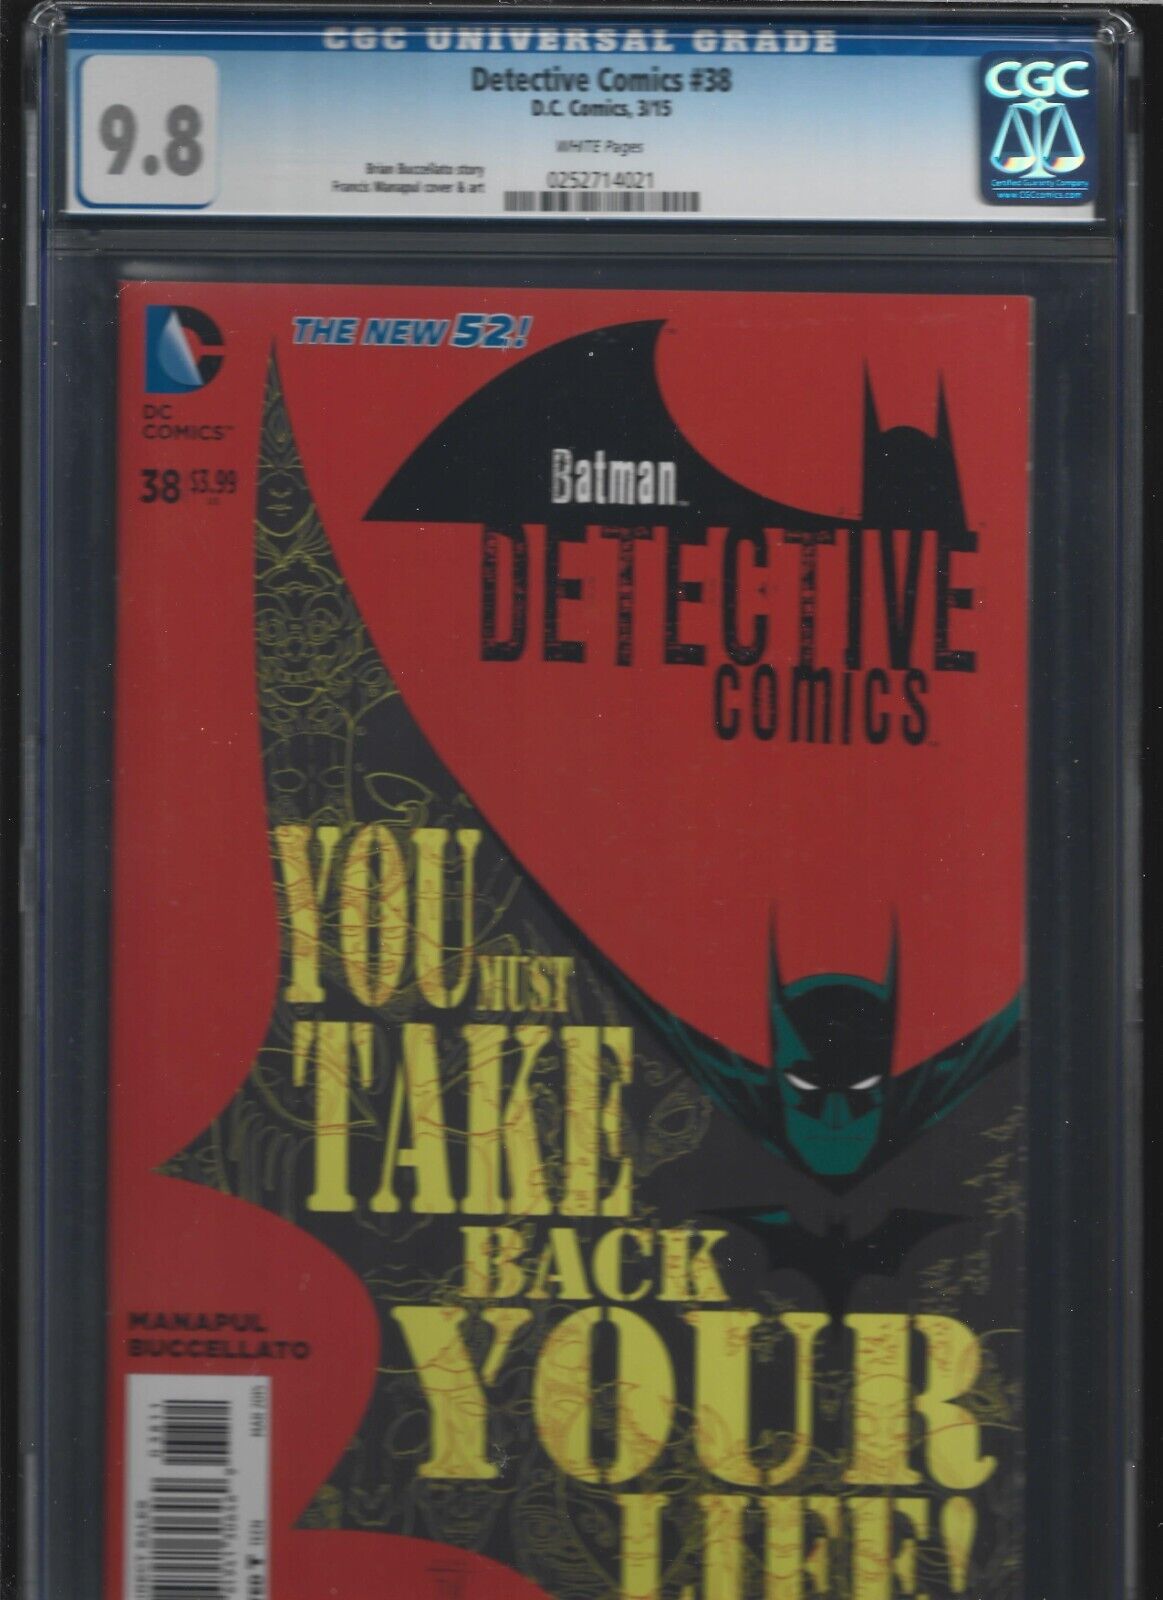 DETECTIVE COMICS #38 CGC 9.8 WHITE PGS 2015 YOU MUST TAKE BACK YOUR LIFE NEW 52